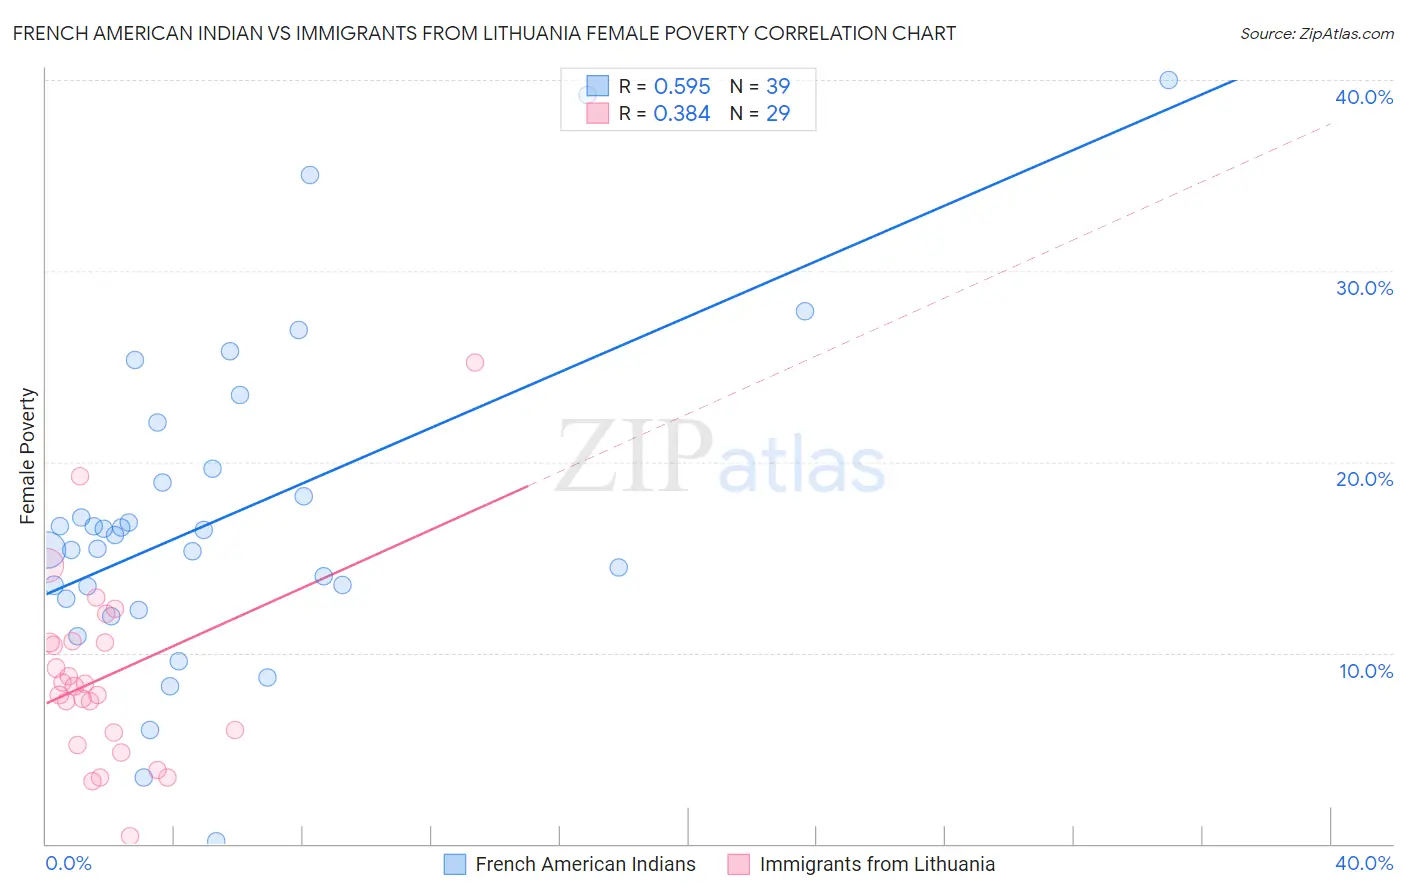 French American Indian vs Immigrants from Lithuania Female Poverty